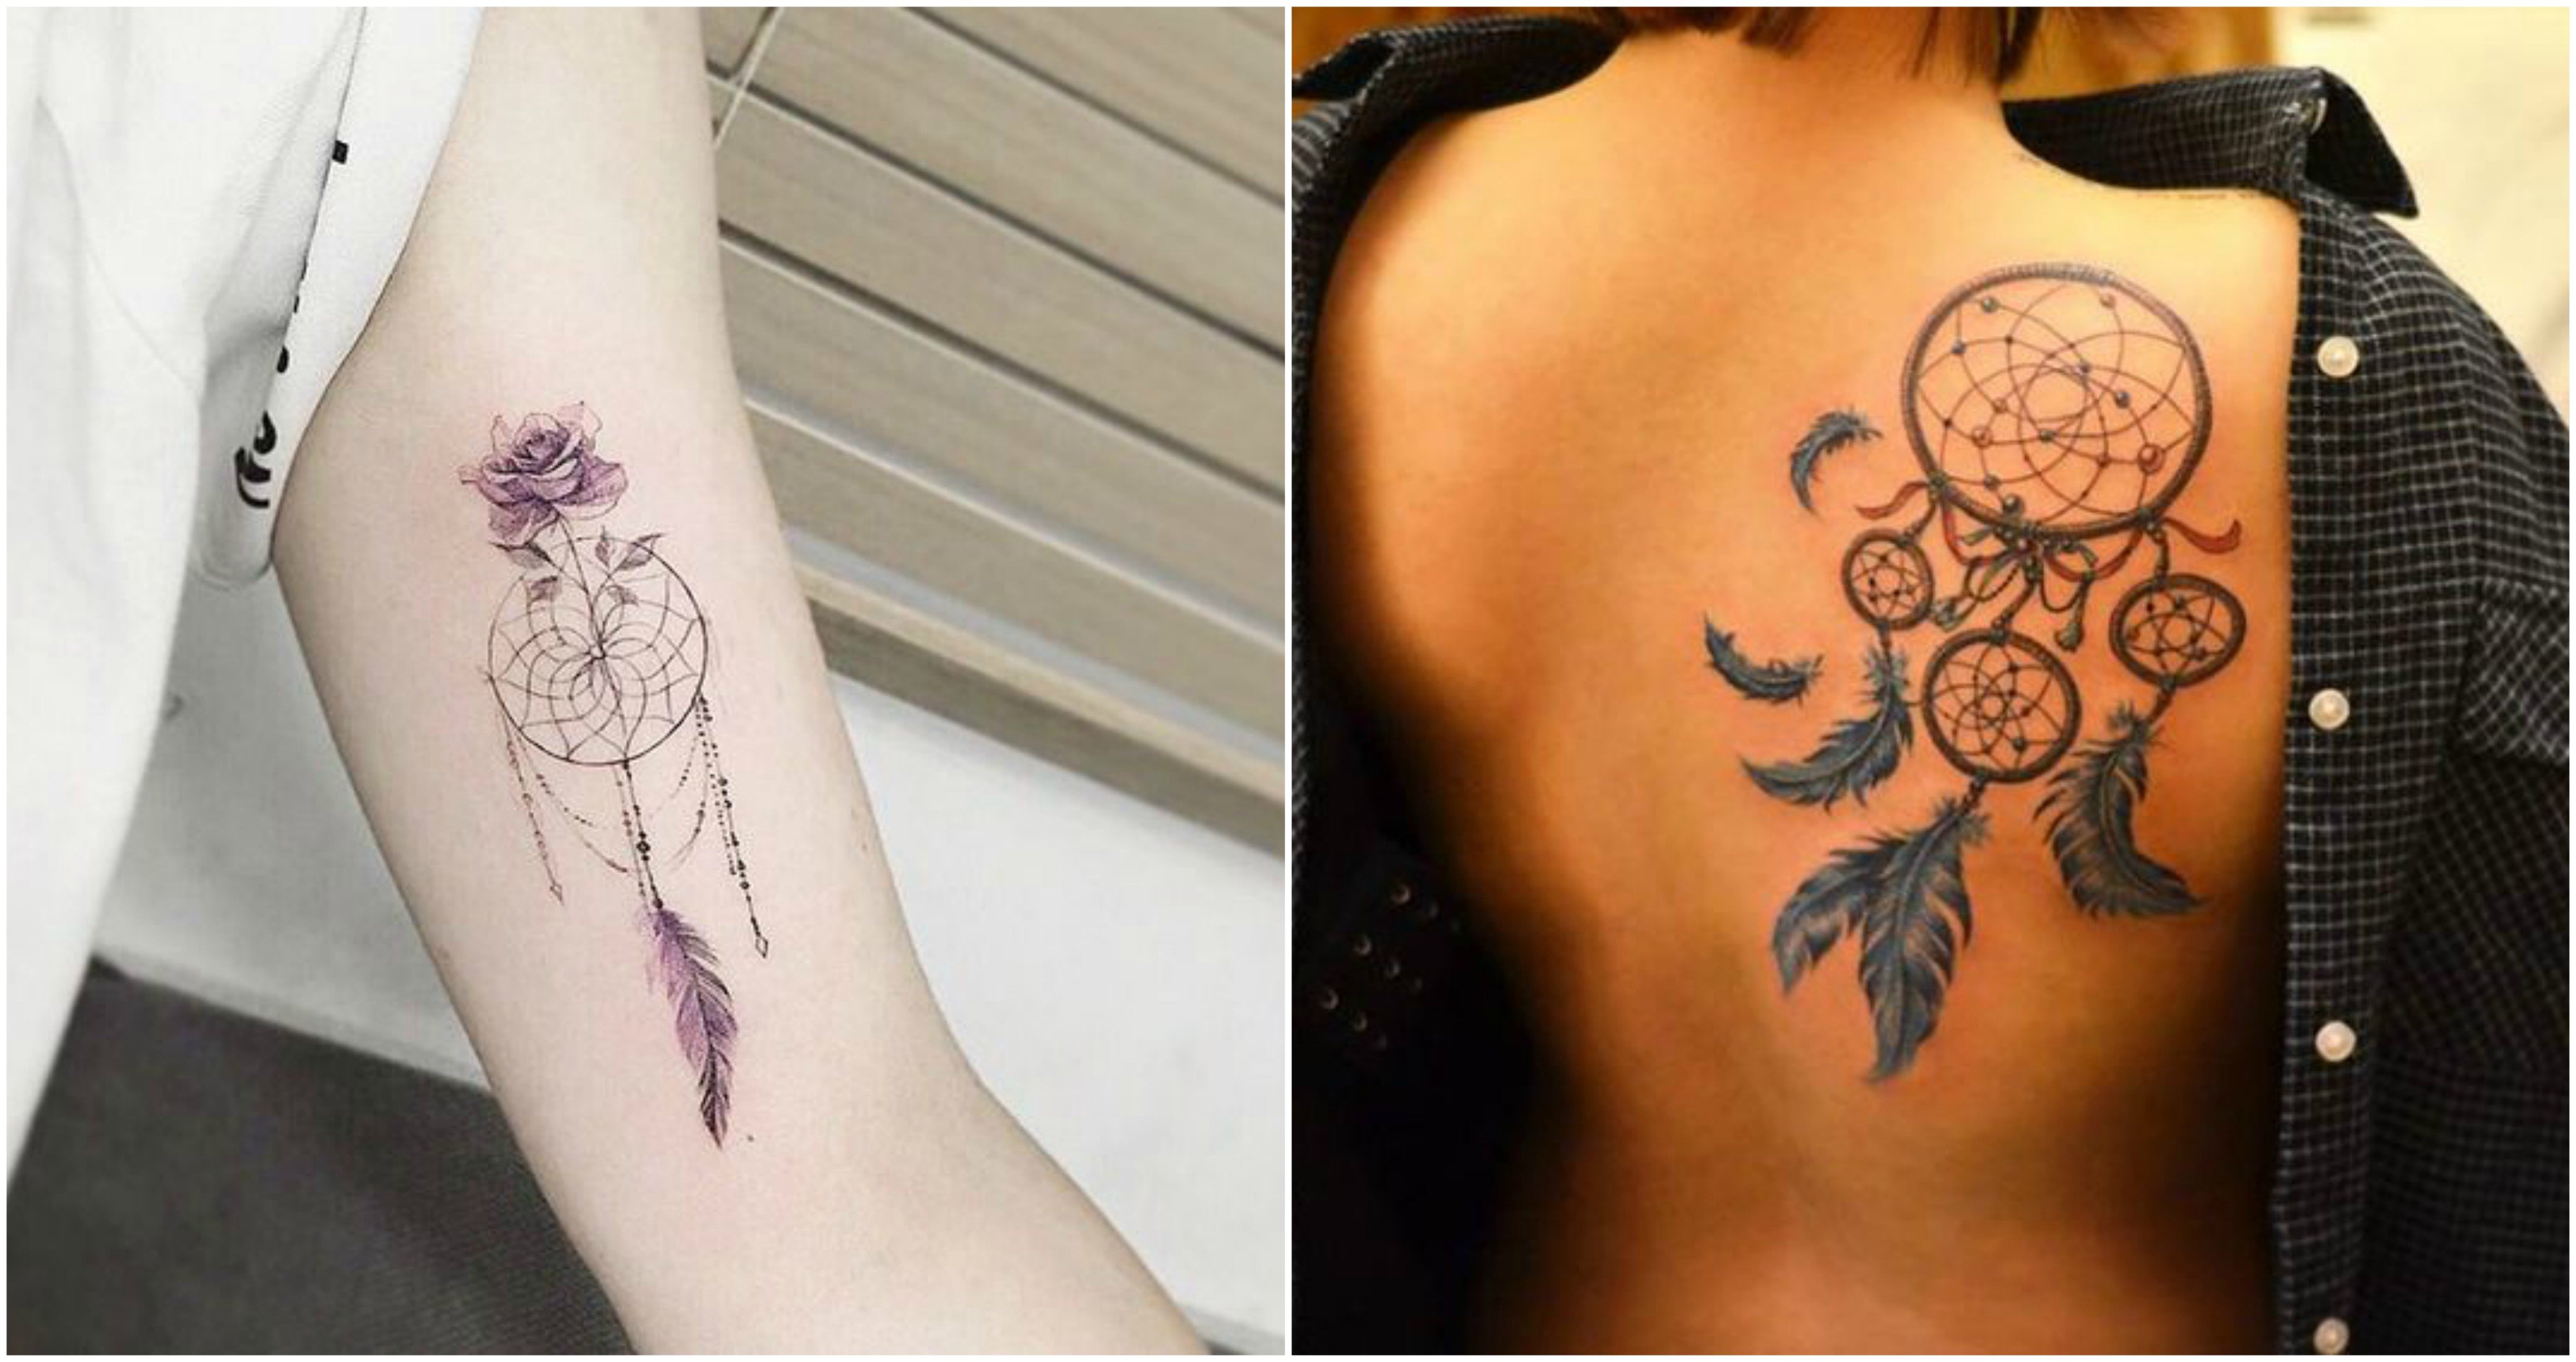 16 Dreamcatcher Tattoos To Gain Protection